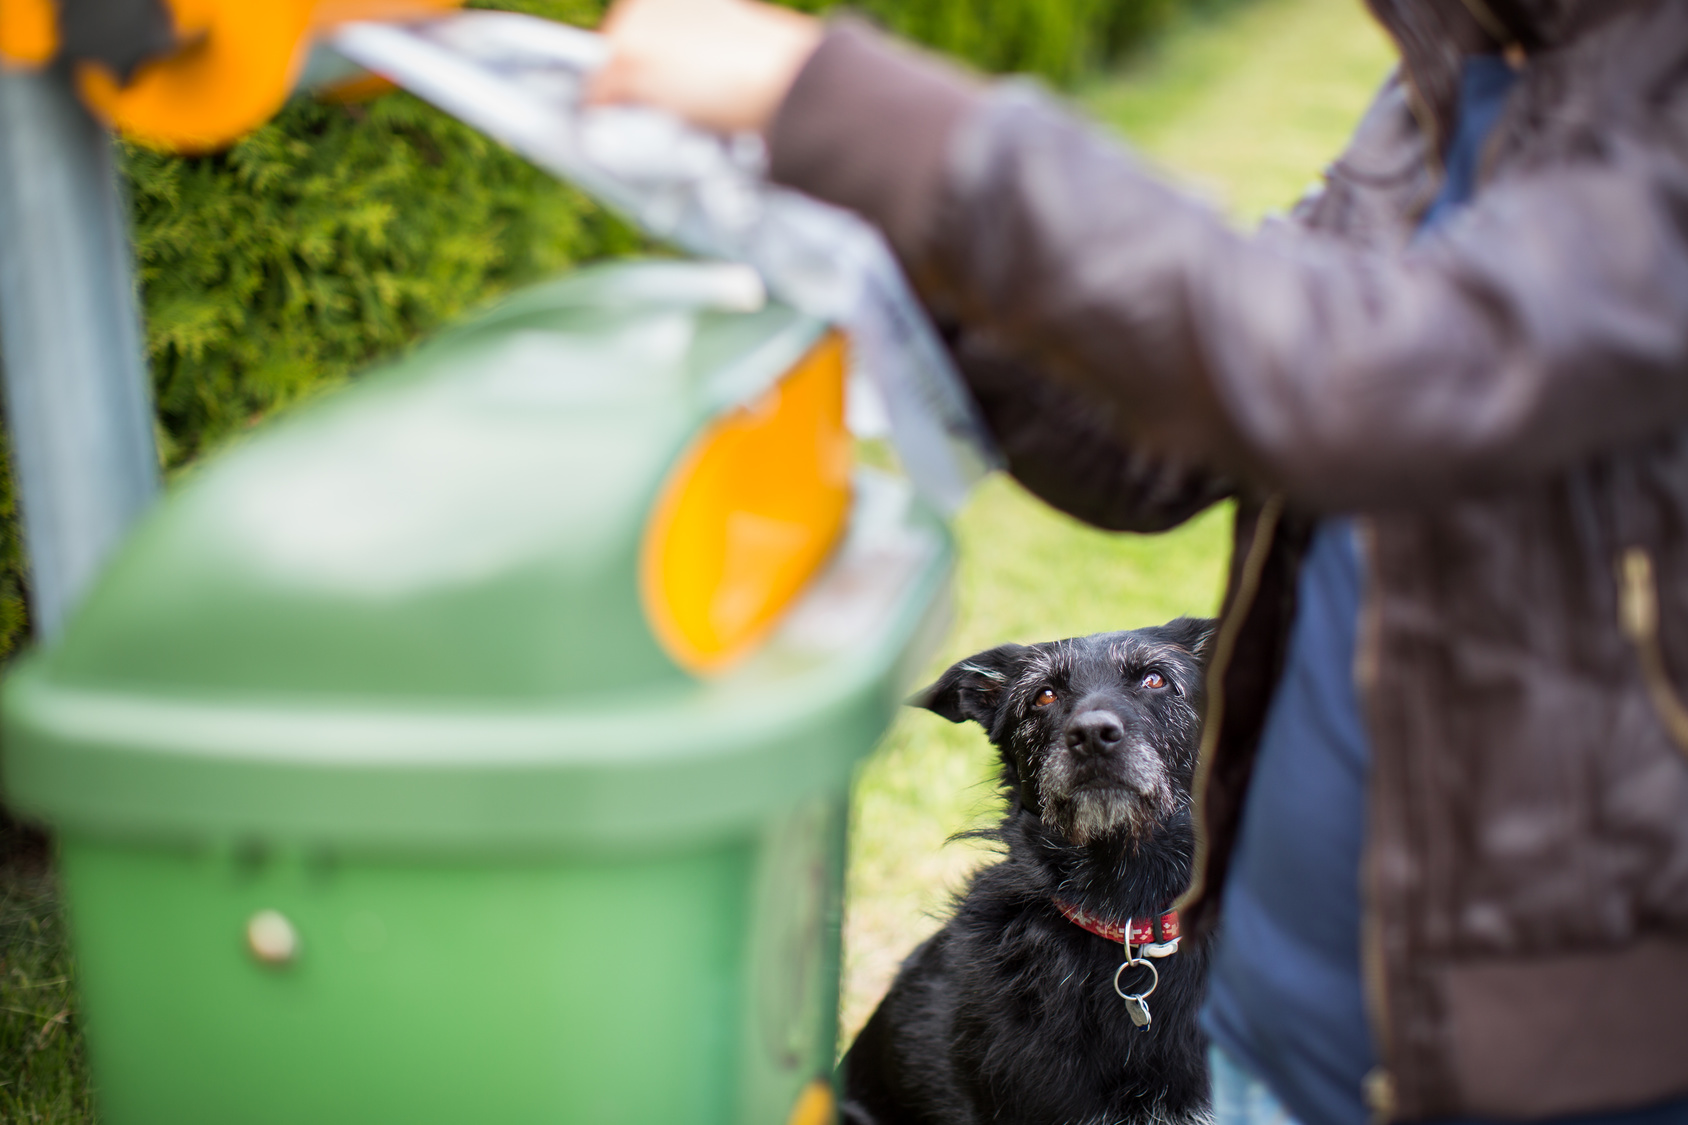 Dog fouling is the top concern in the area